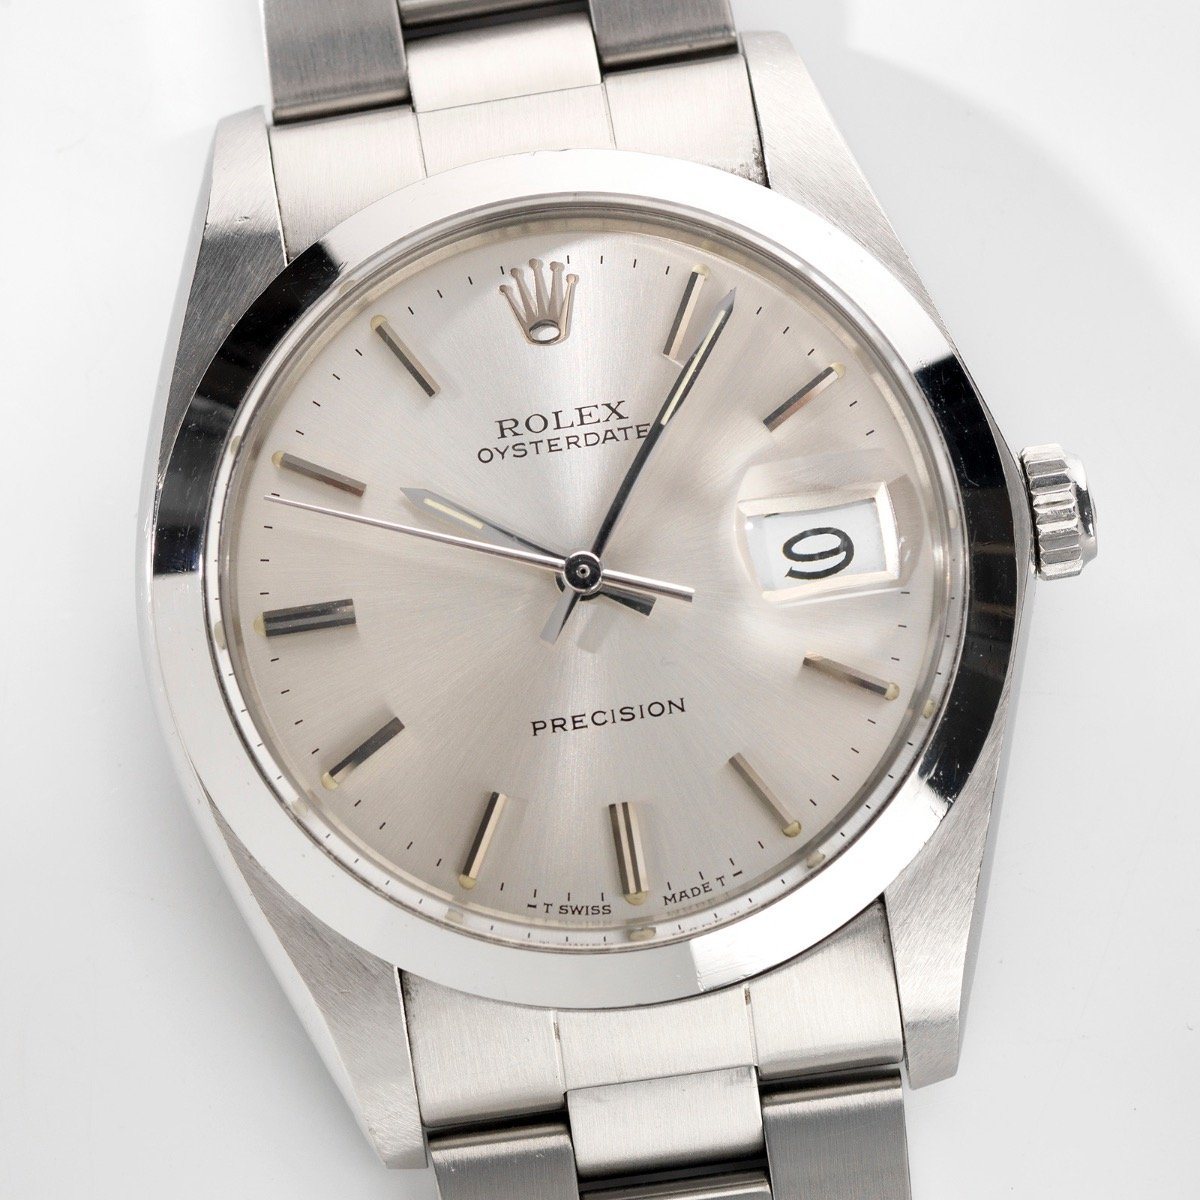 Rolex Oysterdate Silver Dial Reference 6694